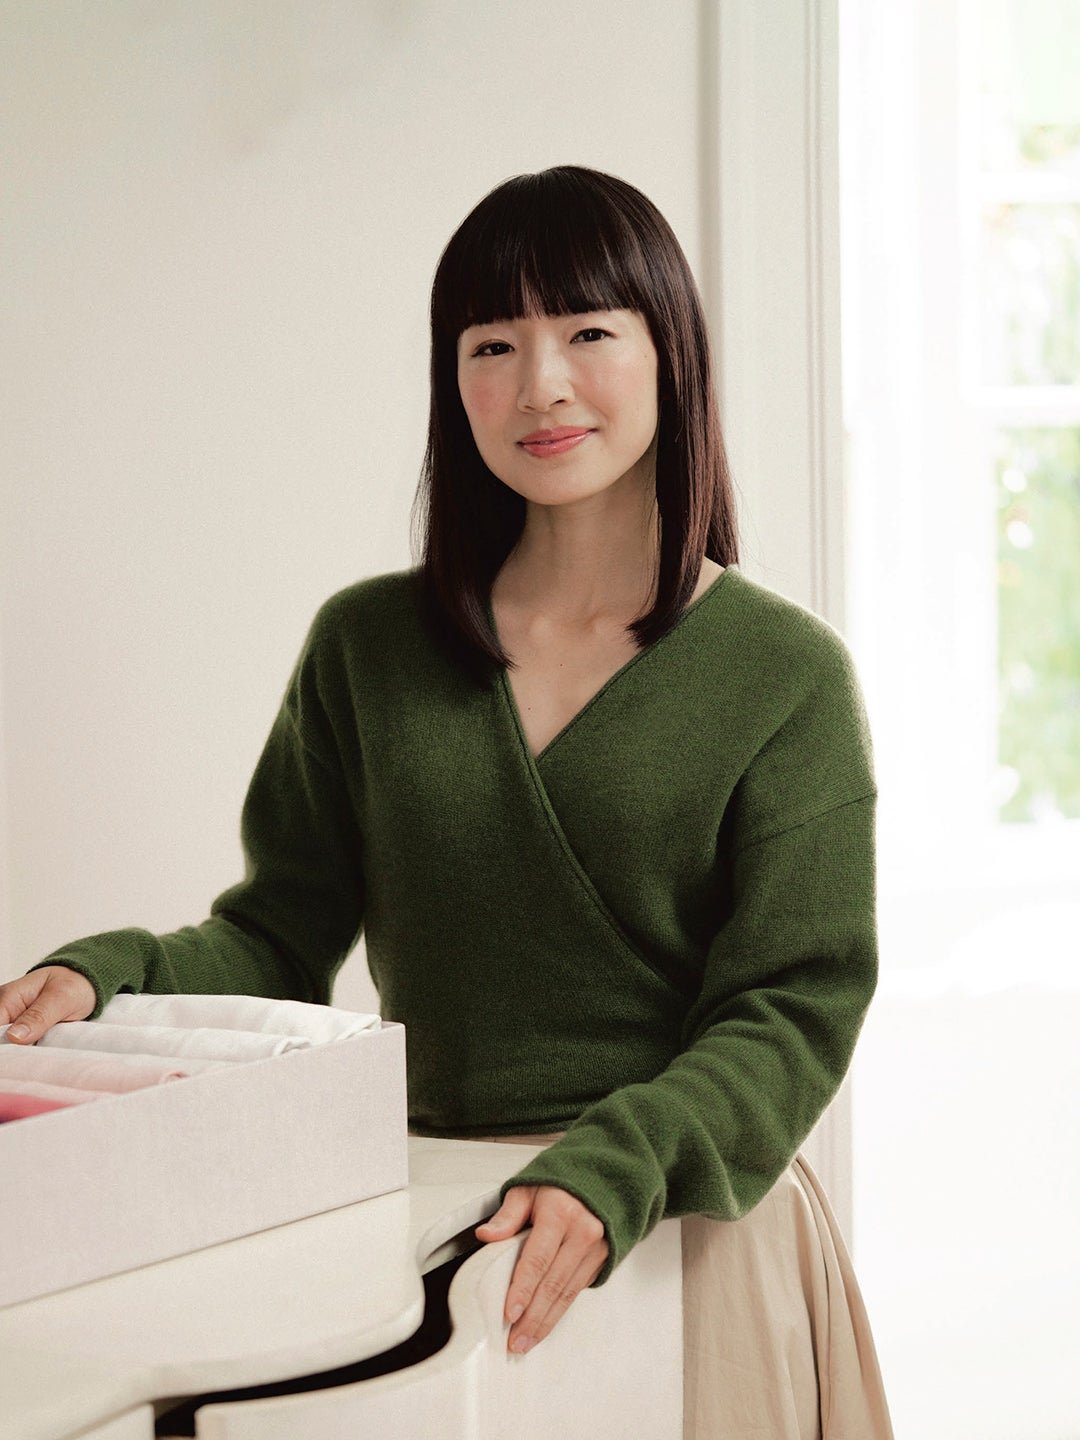 Marie Kondo’s Secret to an Overall Clean Home Is Tackling This Single Chore Every Day